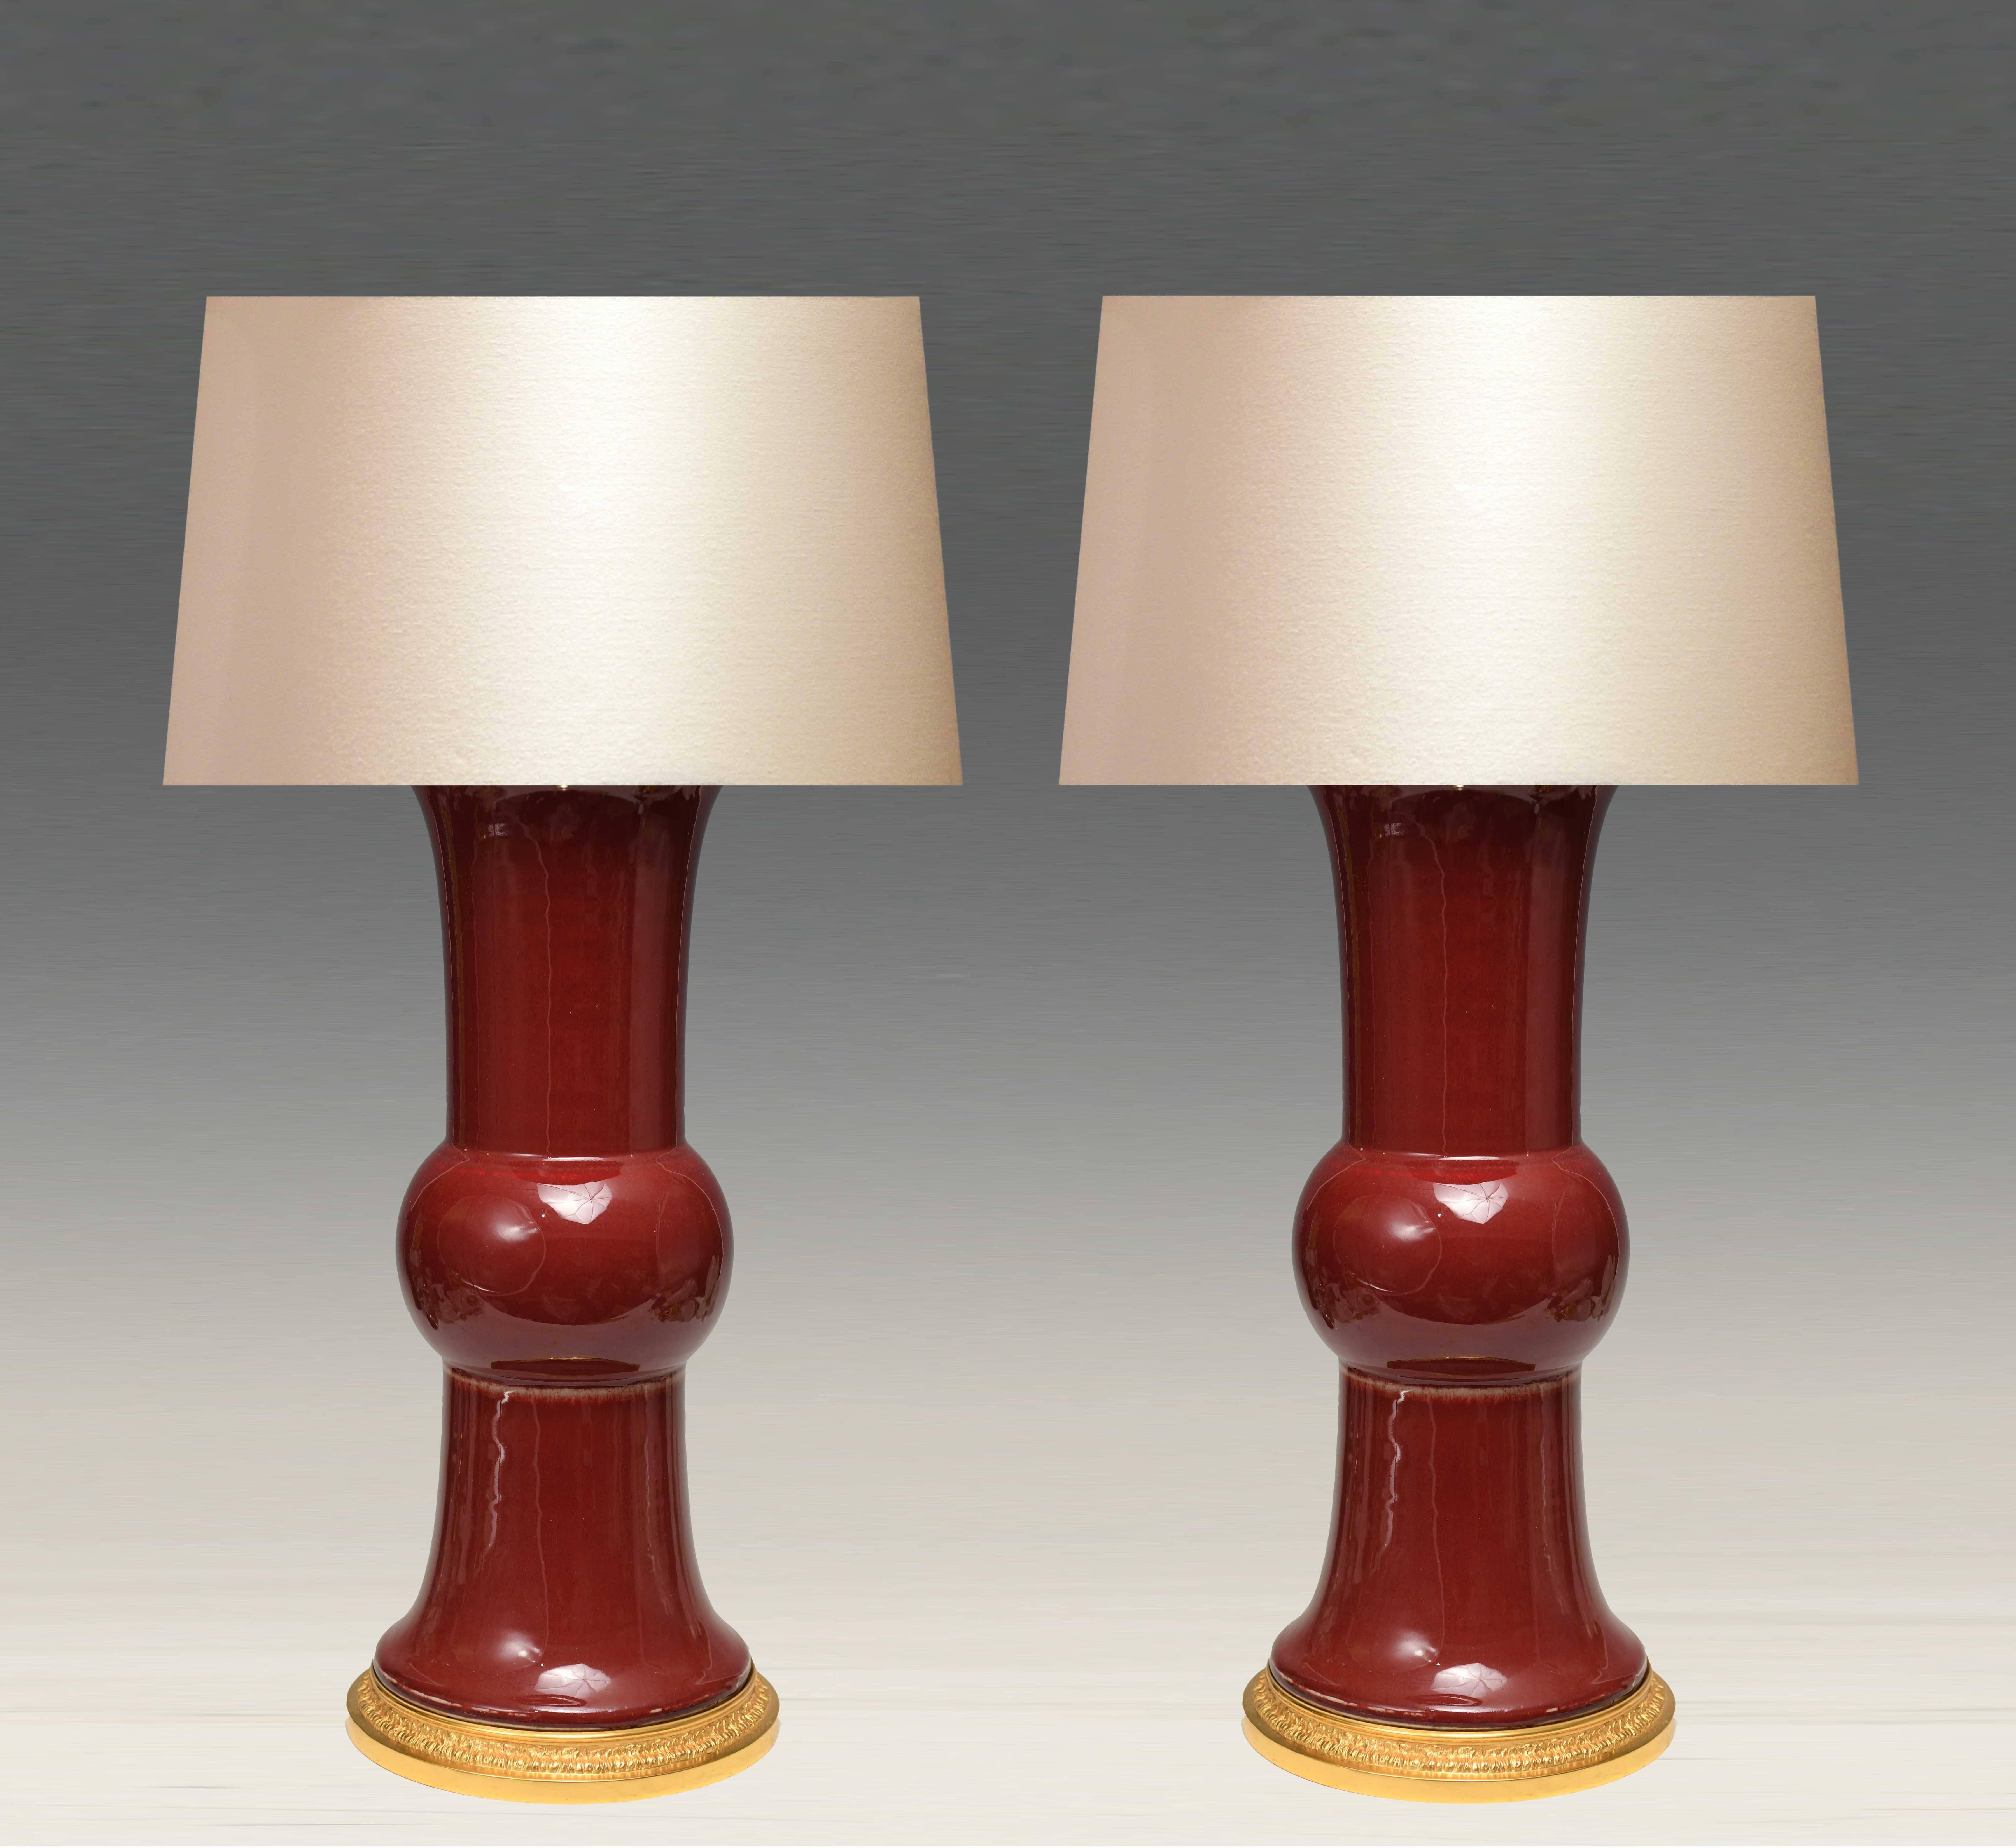 A pair of oxblood porcelain lamp with fine cast gilt brass bases.
Measure: To the top of the porcelain: 19